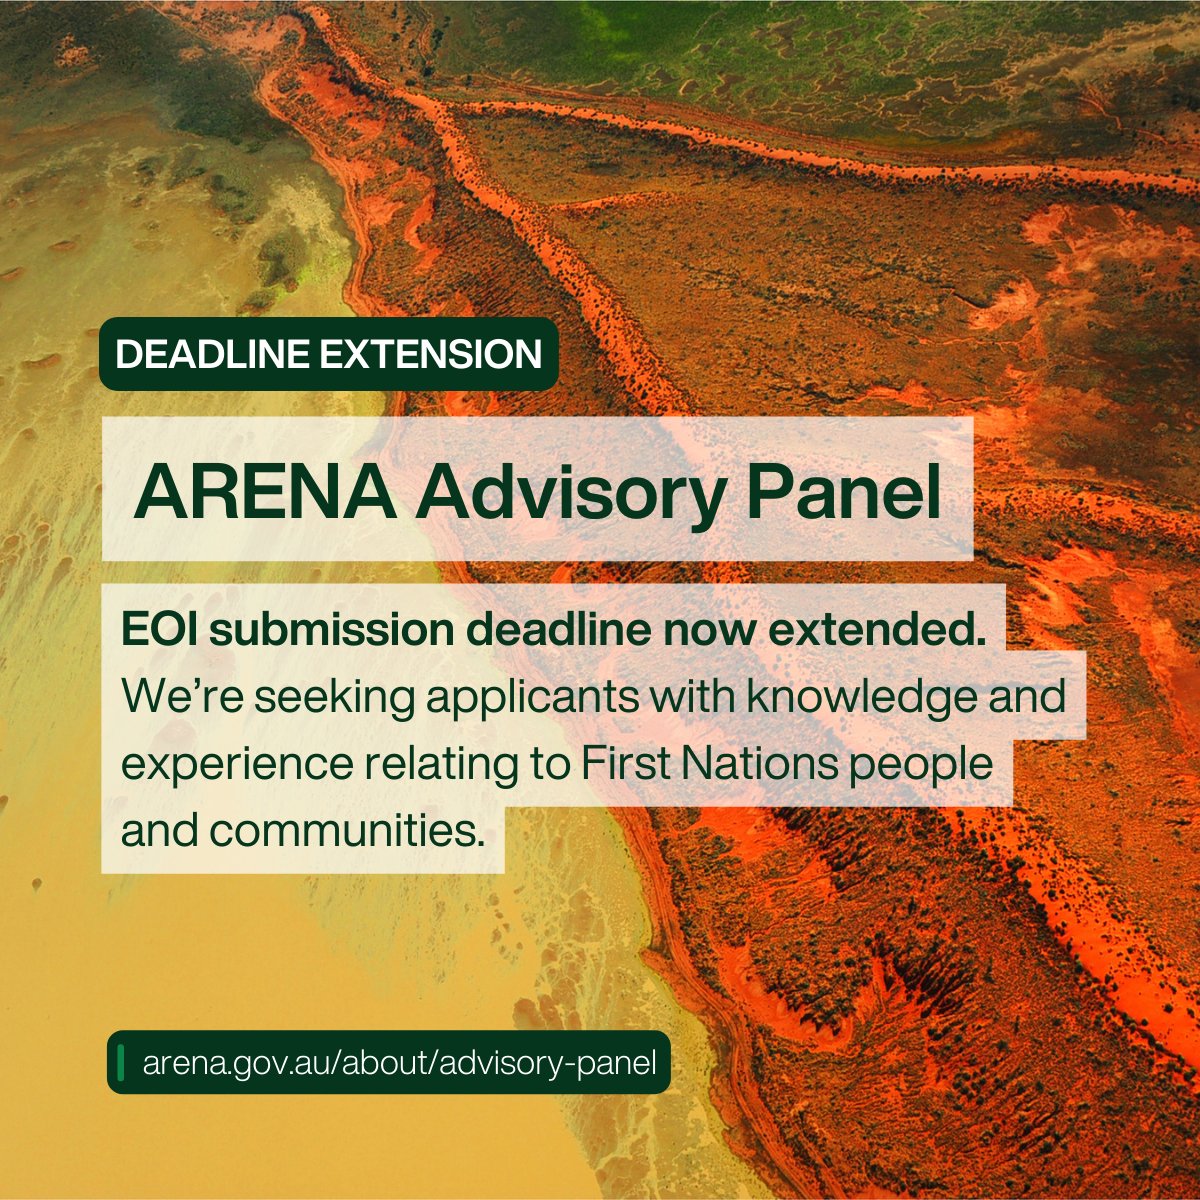 📢EOI deadline extended for ARENA’s Advisory Panel. Our Advisory Panel provides advice on the development & selection of projects & initiatives for funding. We’re seeking applicants with First Nations knowledge & experience. ⏰Apply by Wed 15 May: arena.gov.au/about/advisory…